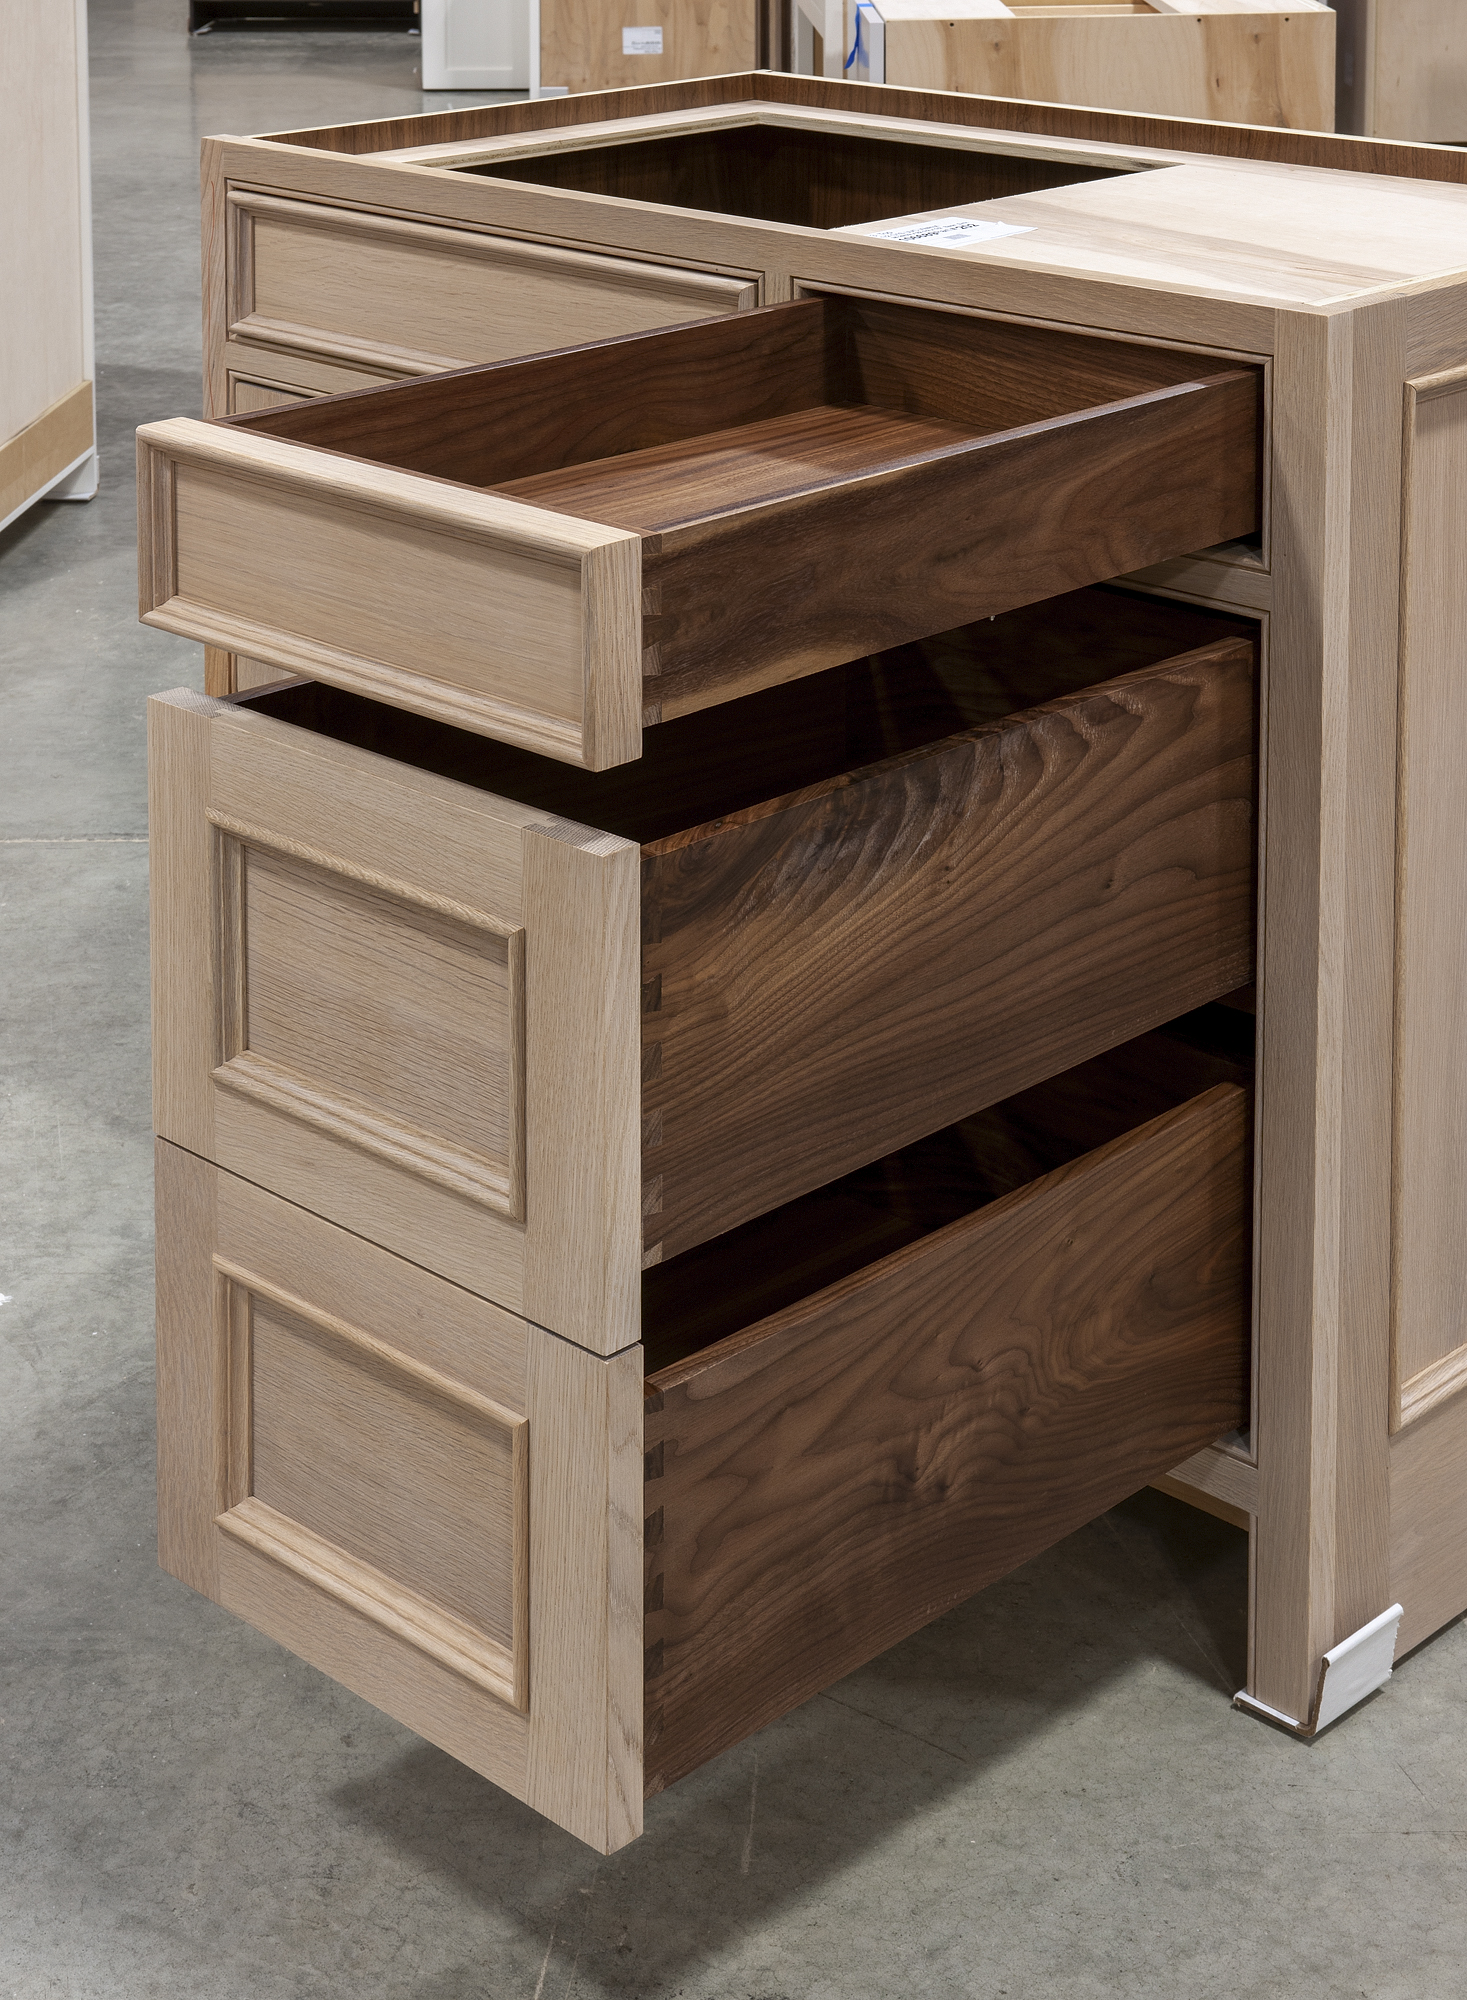 Five Drawer Sink Base Cabinet With Pipe